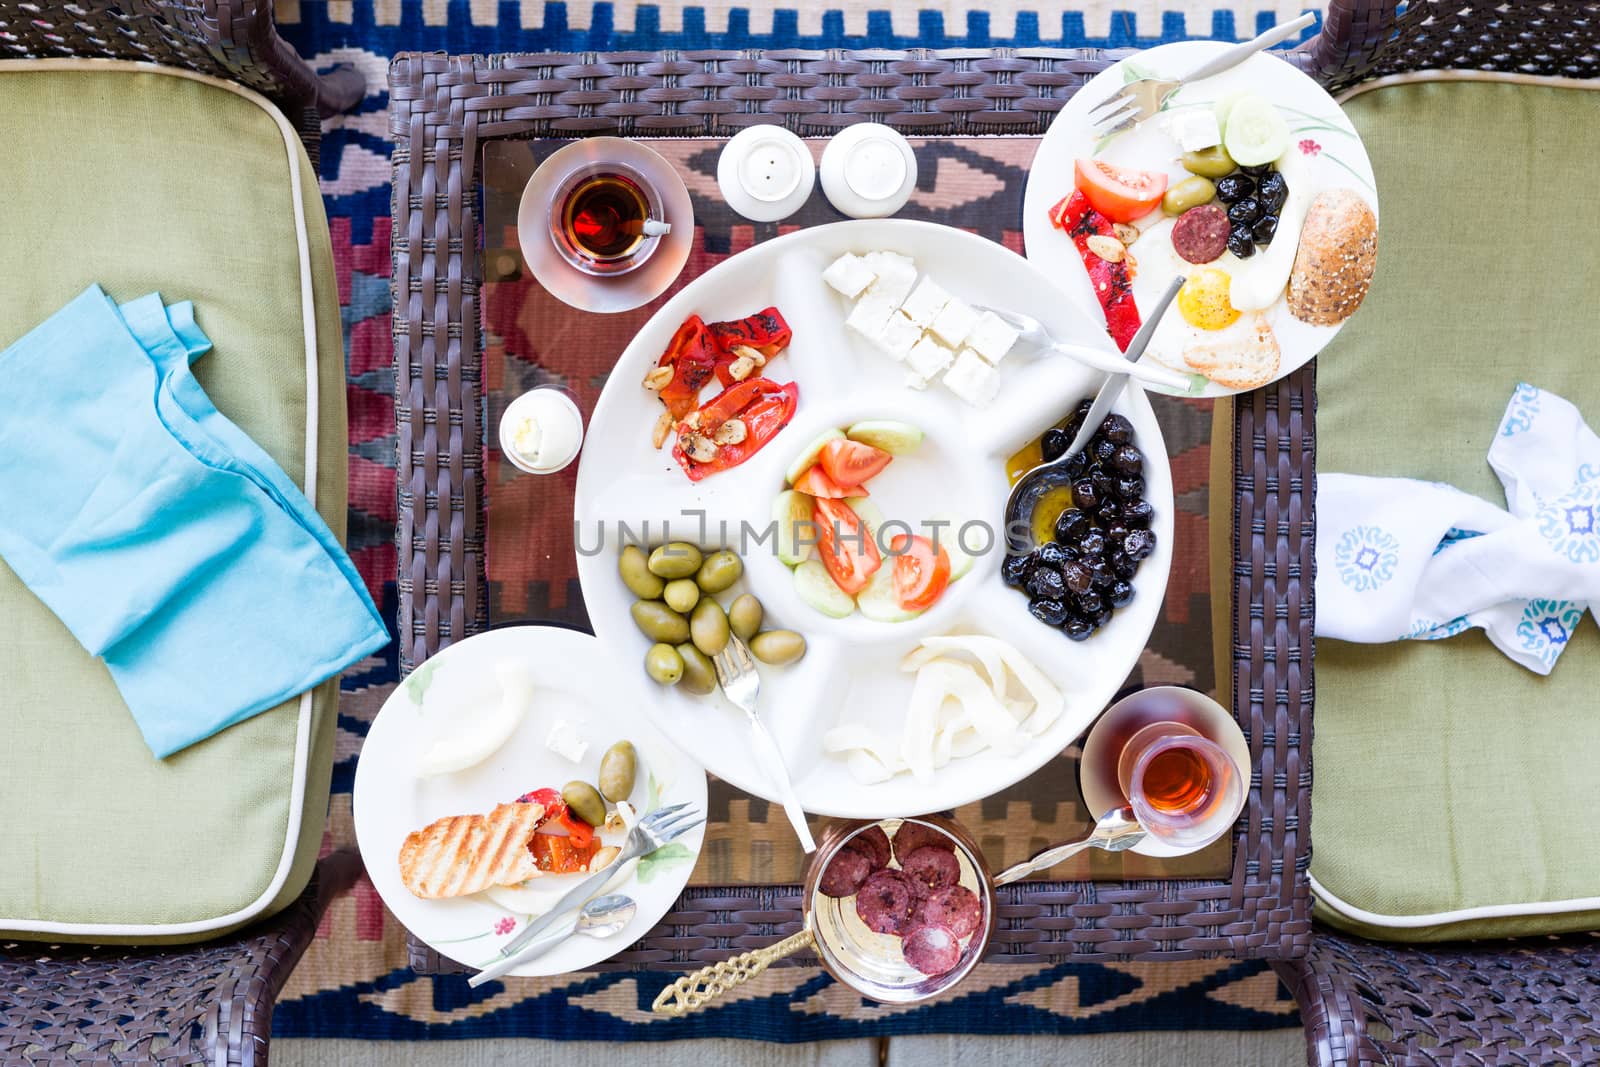 Unfinished Turkish breakfast on a patio table with a serving of fried eggs with a selection of fresh tomato, olives, cheese and mugs of Turkish tea, overhead view with napkins on chairs